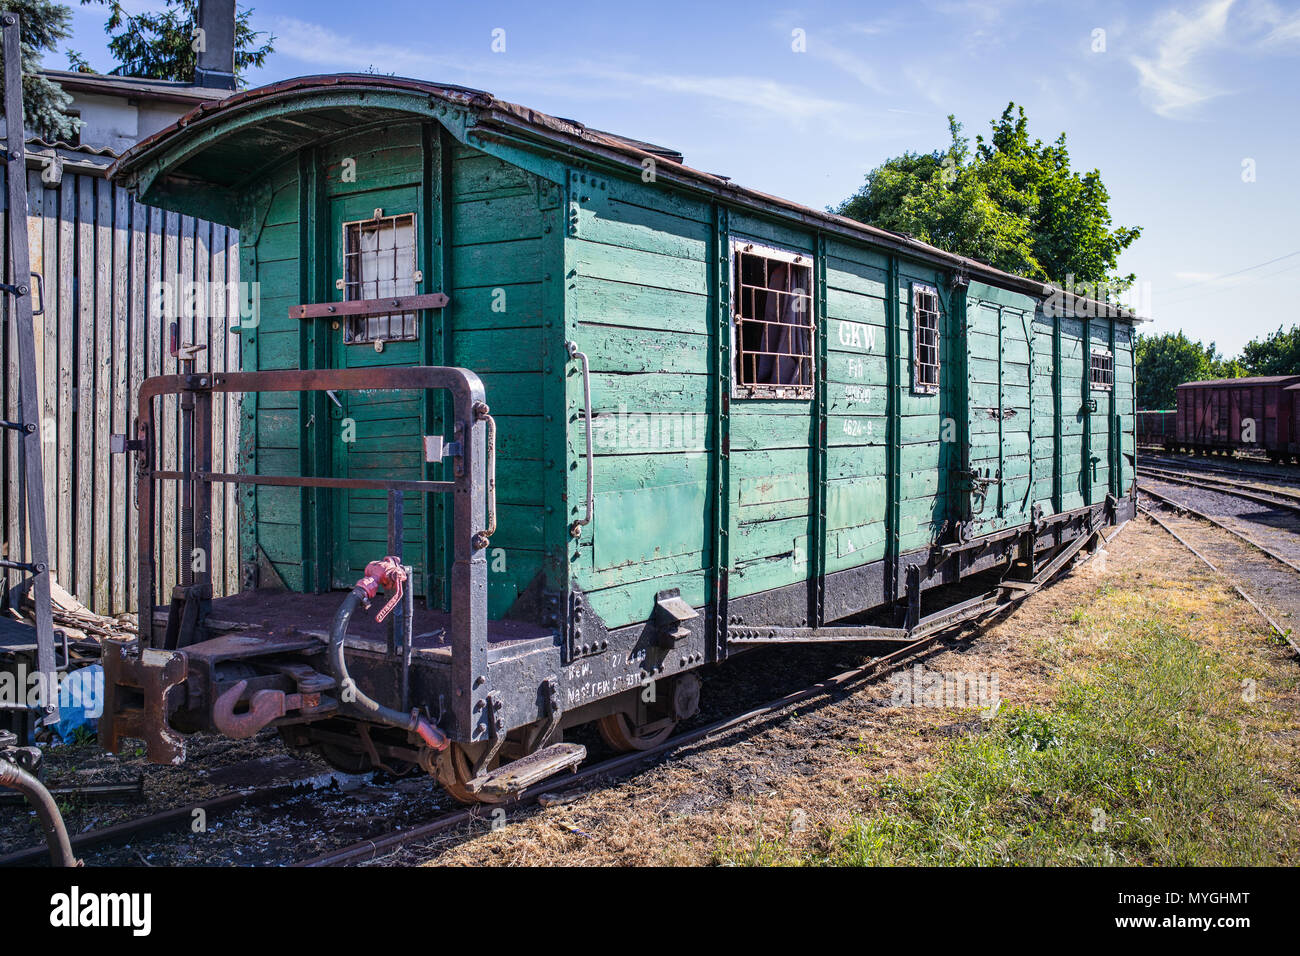 Railways - old, vintage car, carriage of the narrow-gauge railway in Gniezno, Poland. Stock Photo